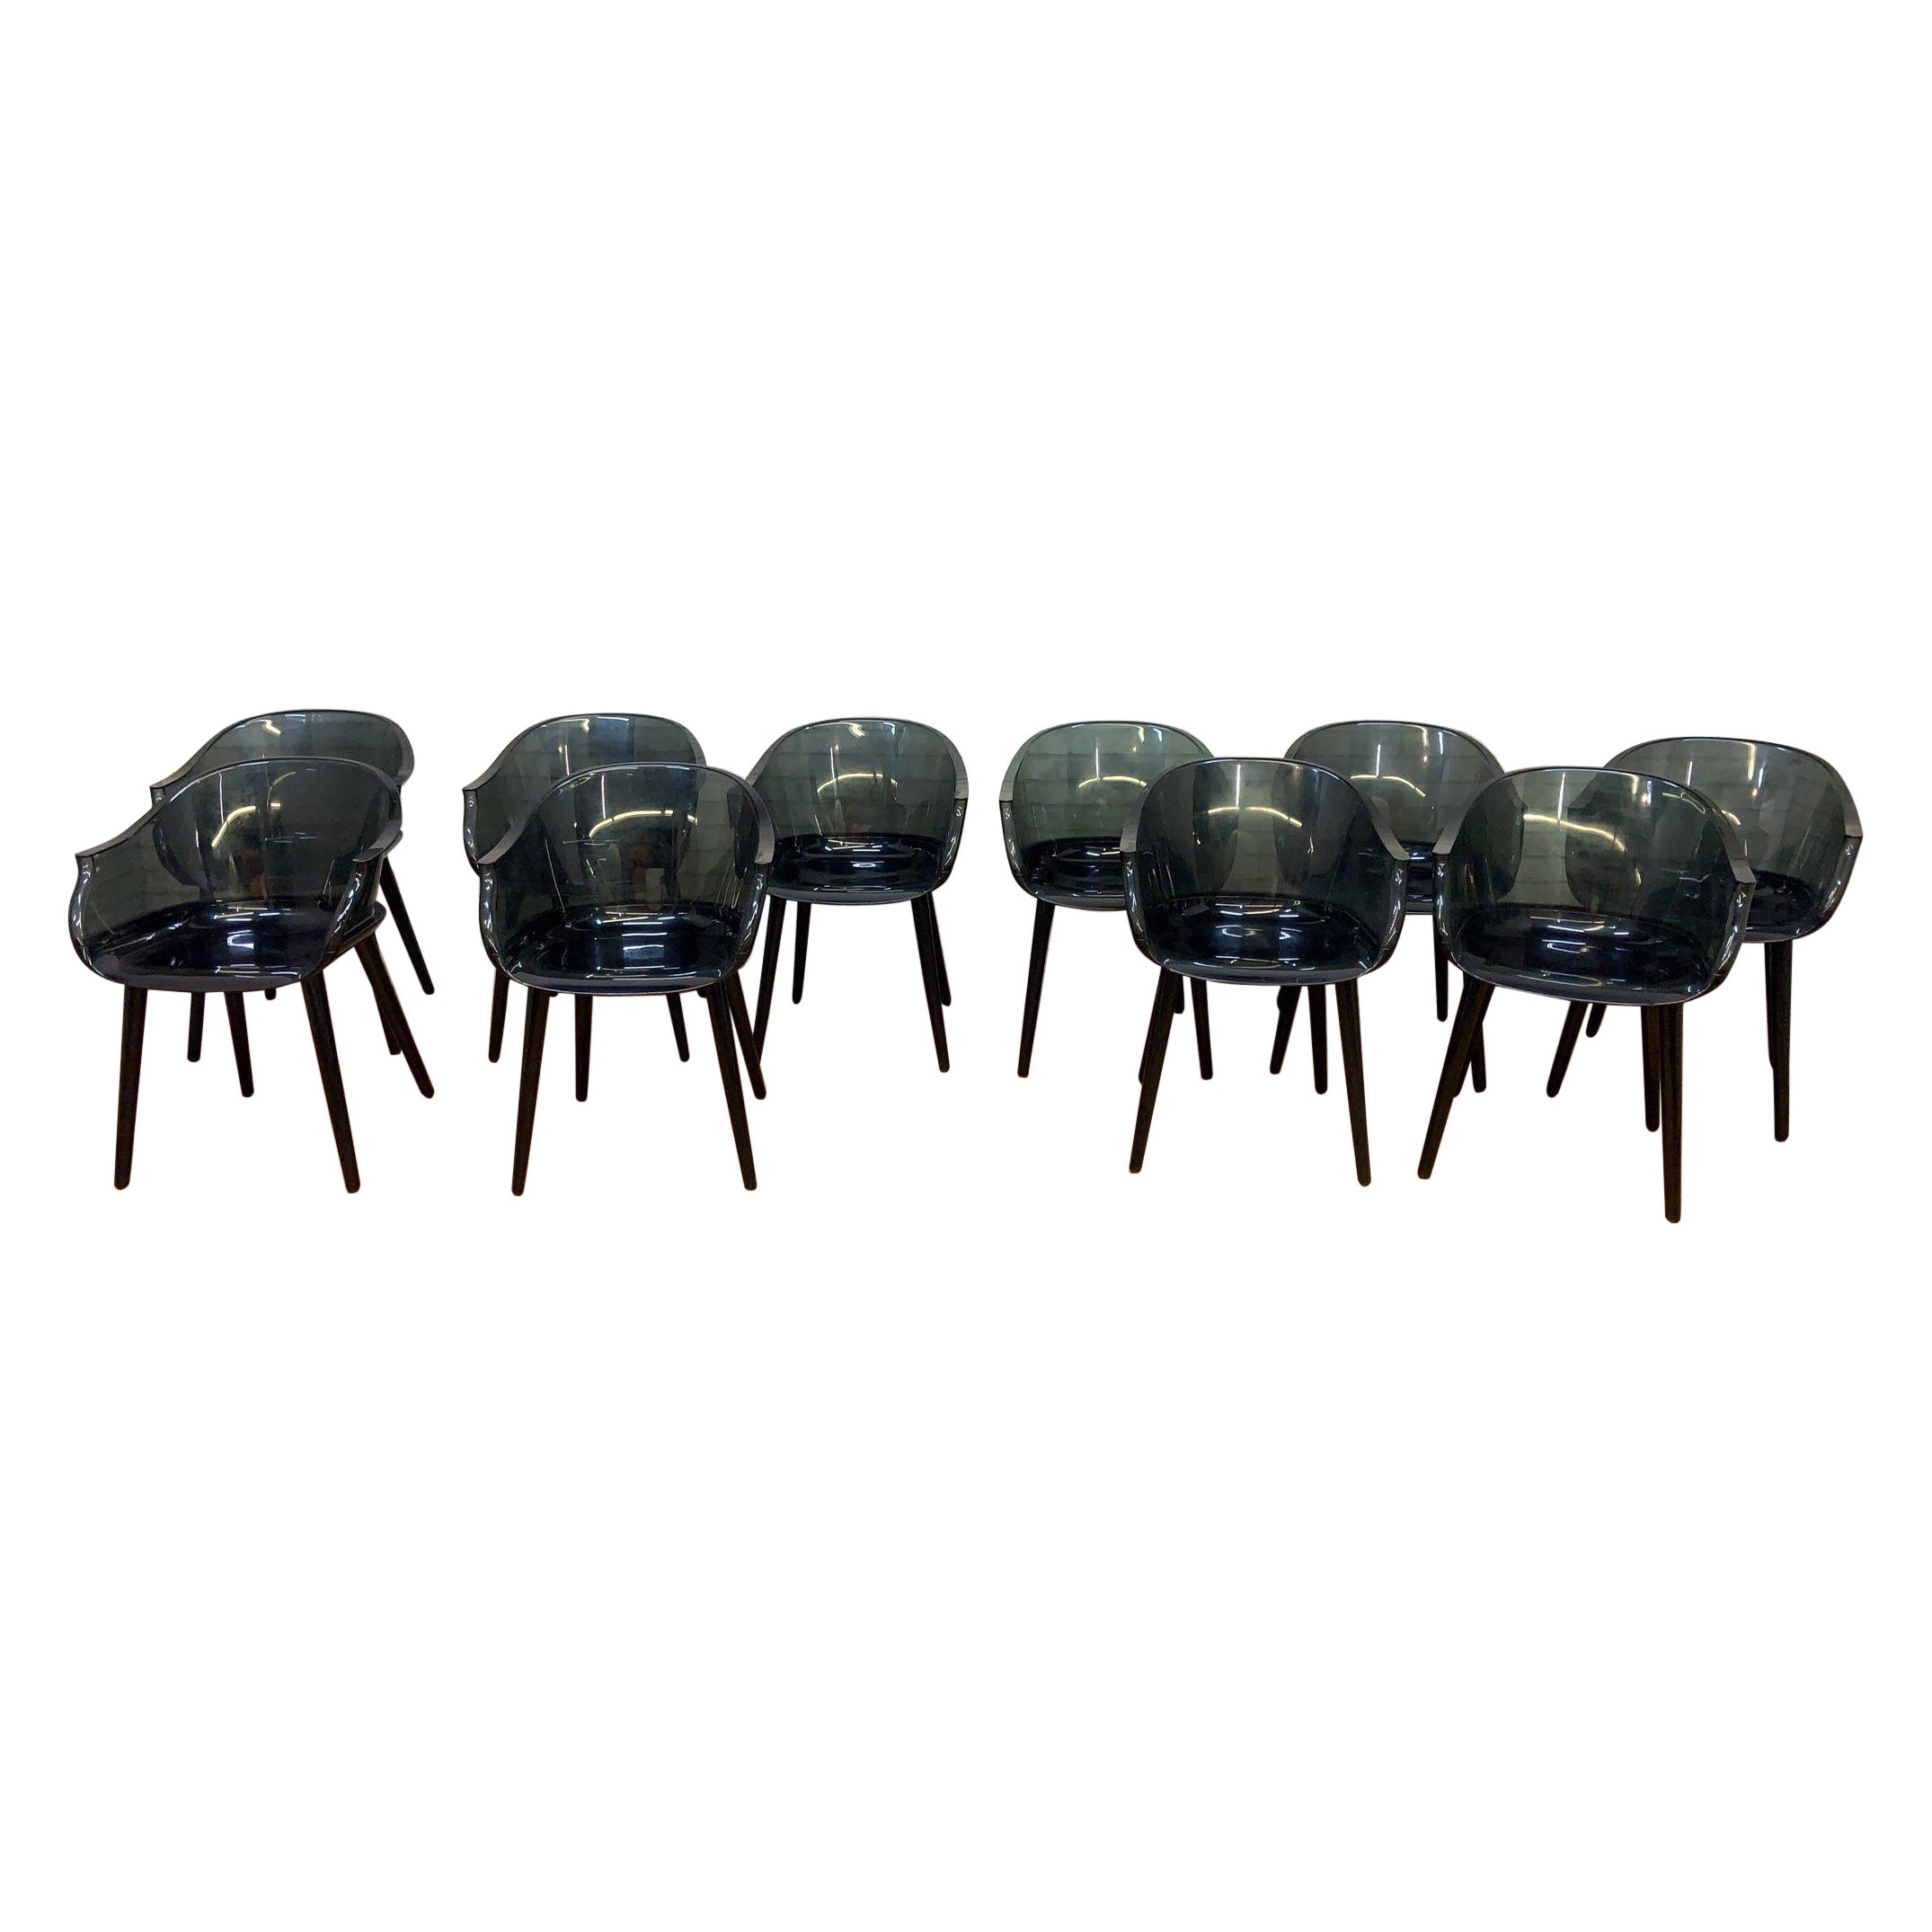 Modern Smoked Cyborg Armchair by Marcel Wanders for Magis Italy - Set of 10 For Sale